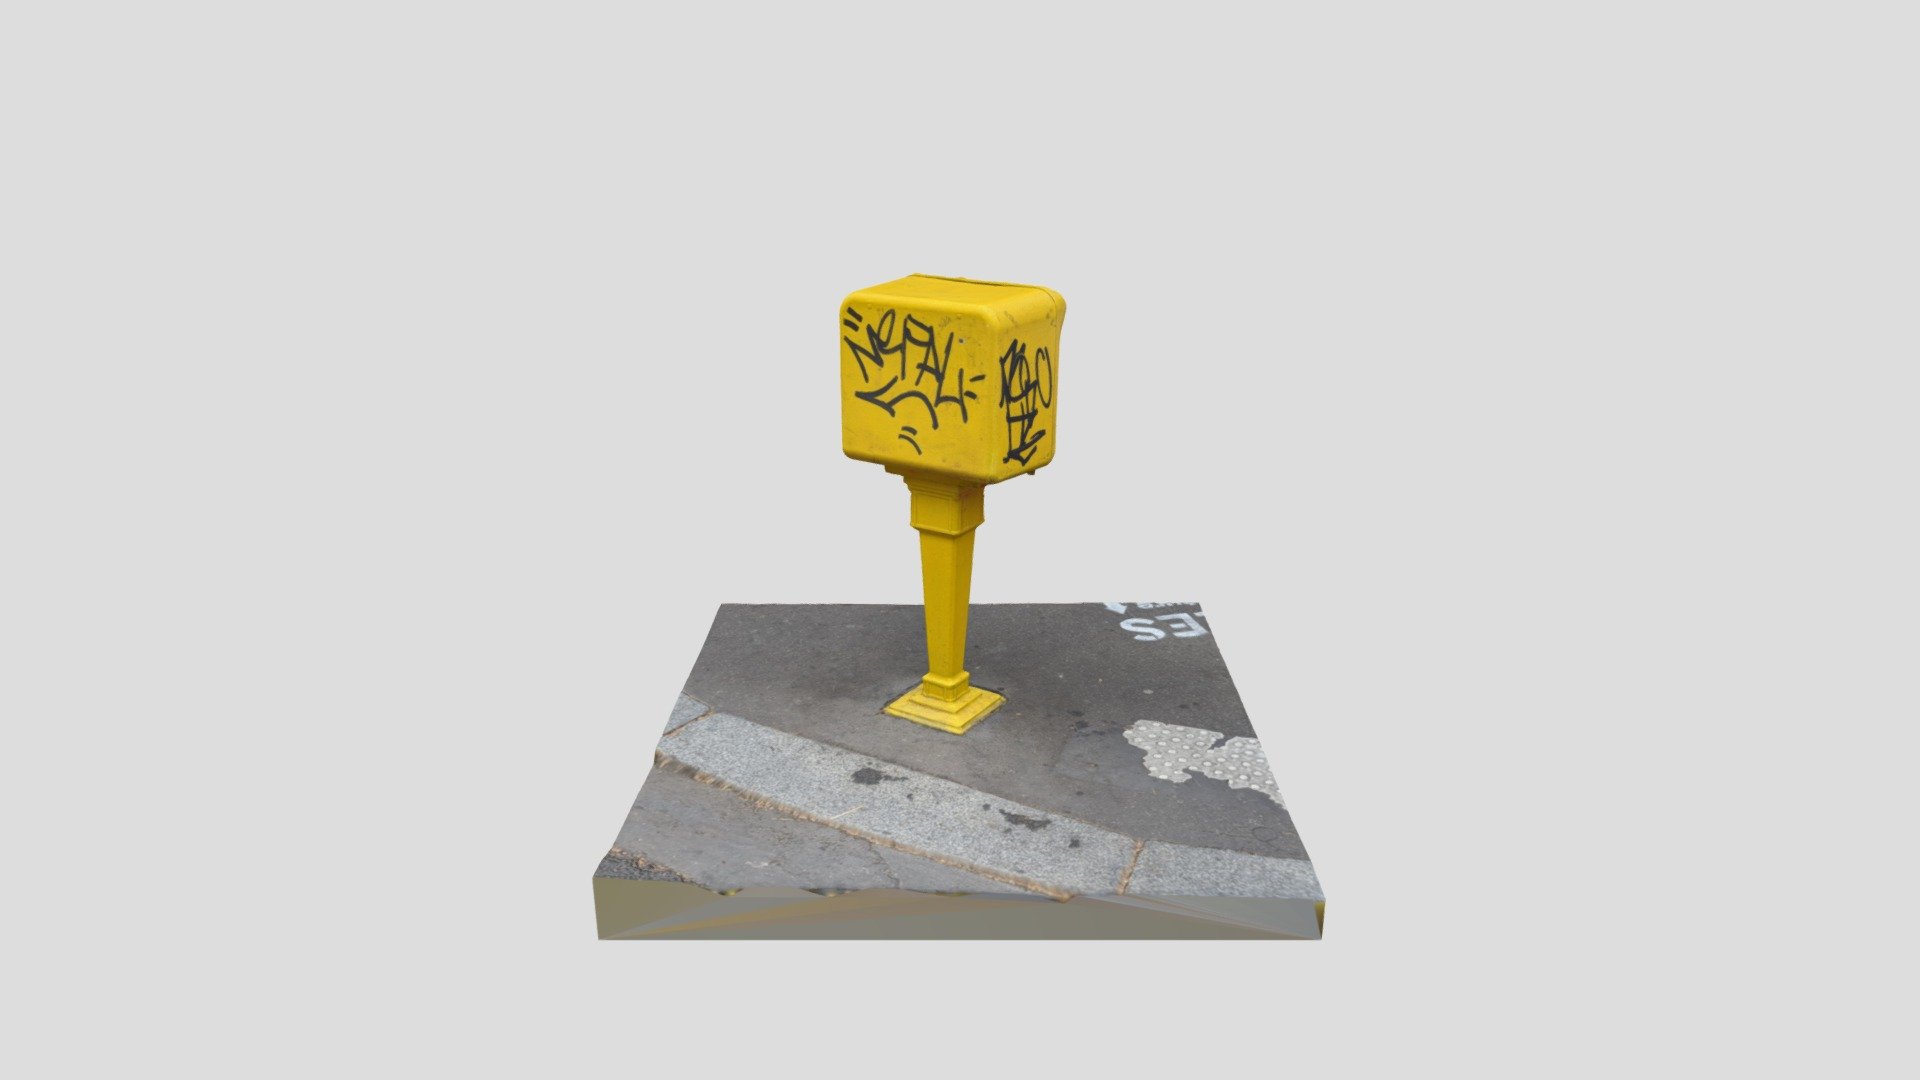 La Poste mail box in Paris
One of the models that are stand-alone

Created in RealityCapture by Capturing Reality from 154 images in 00h:07m:52s 3d model